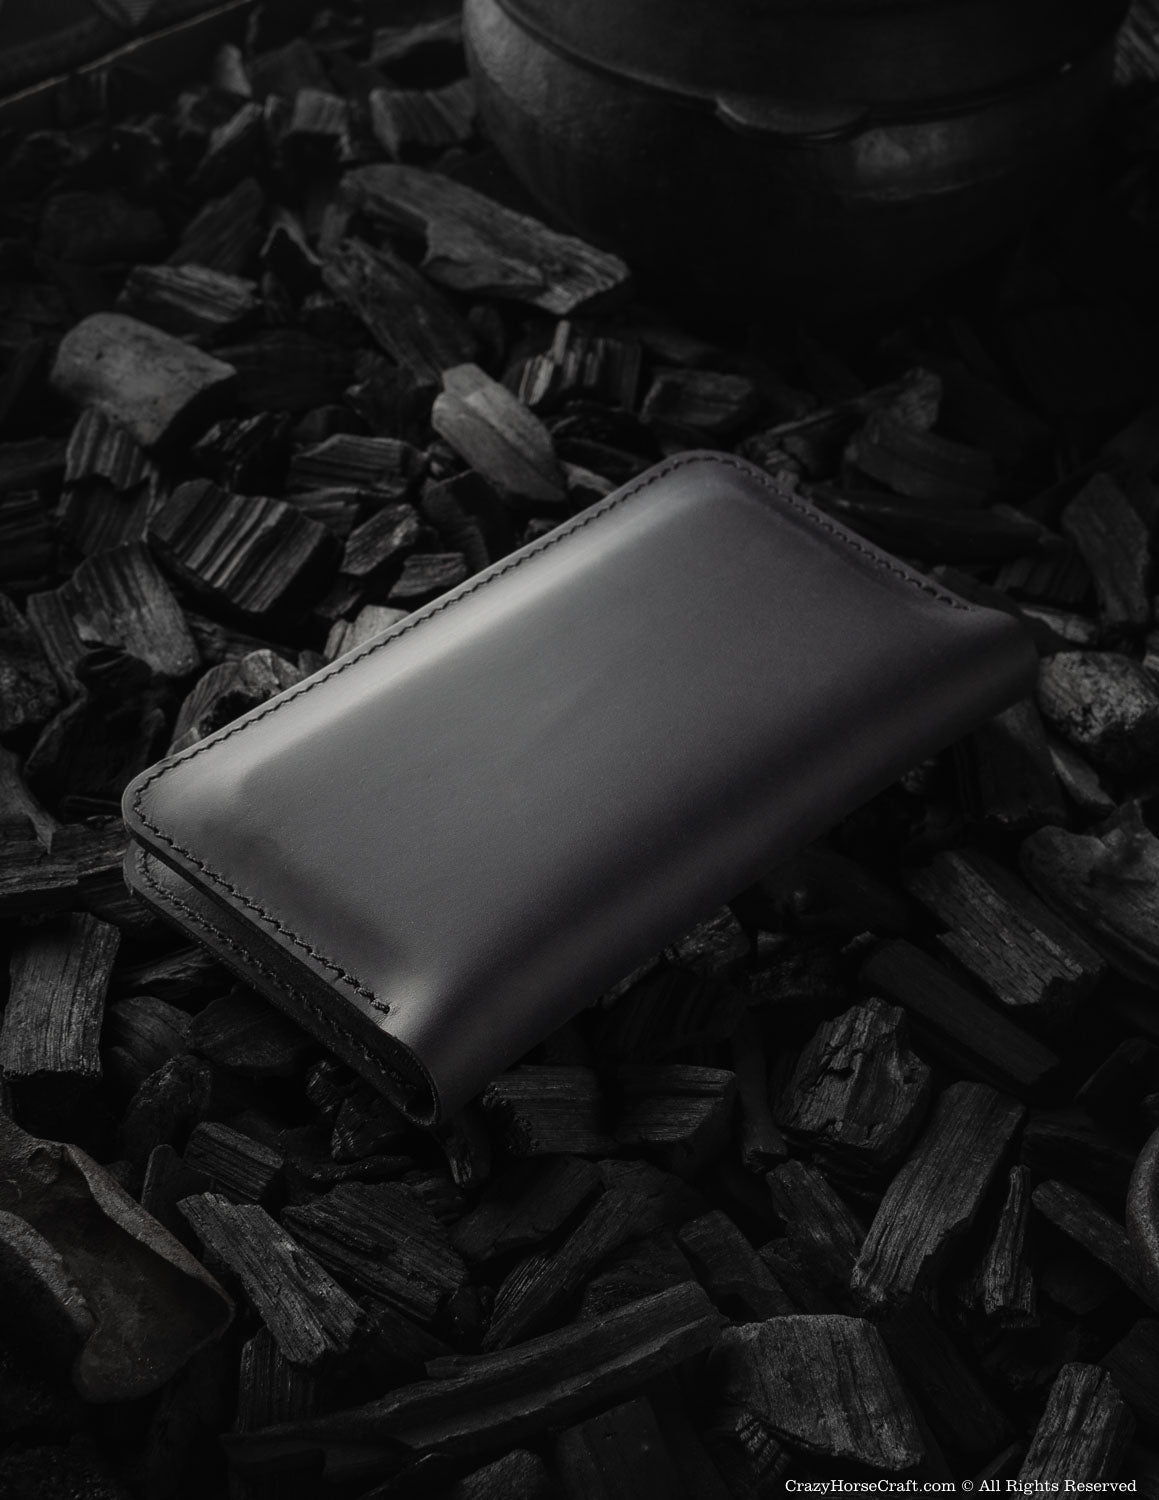 Leather wallet / case for two phones | Carbon Black